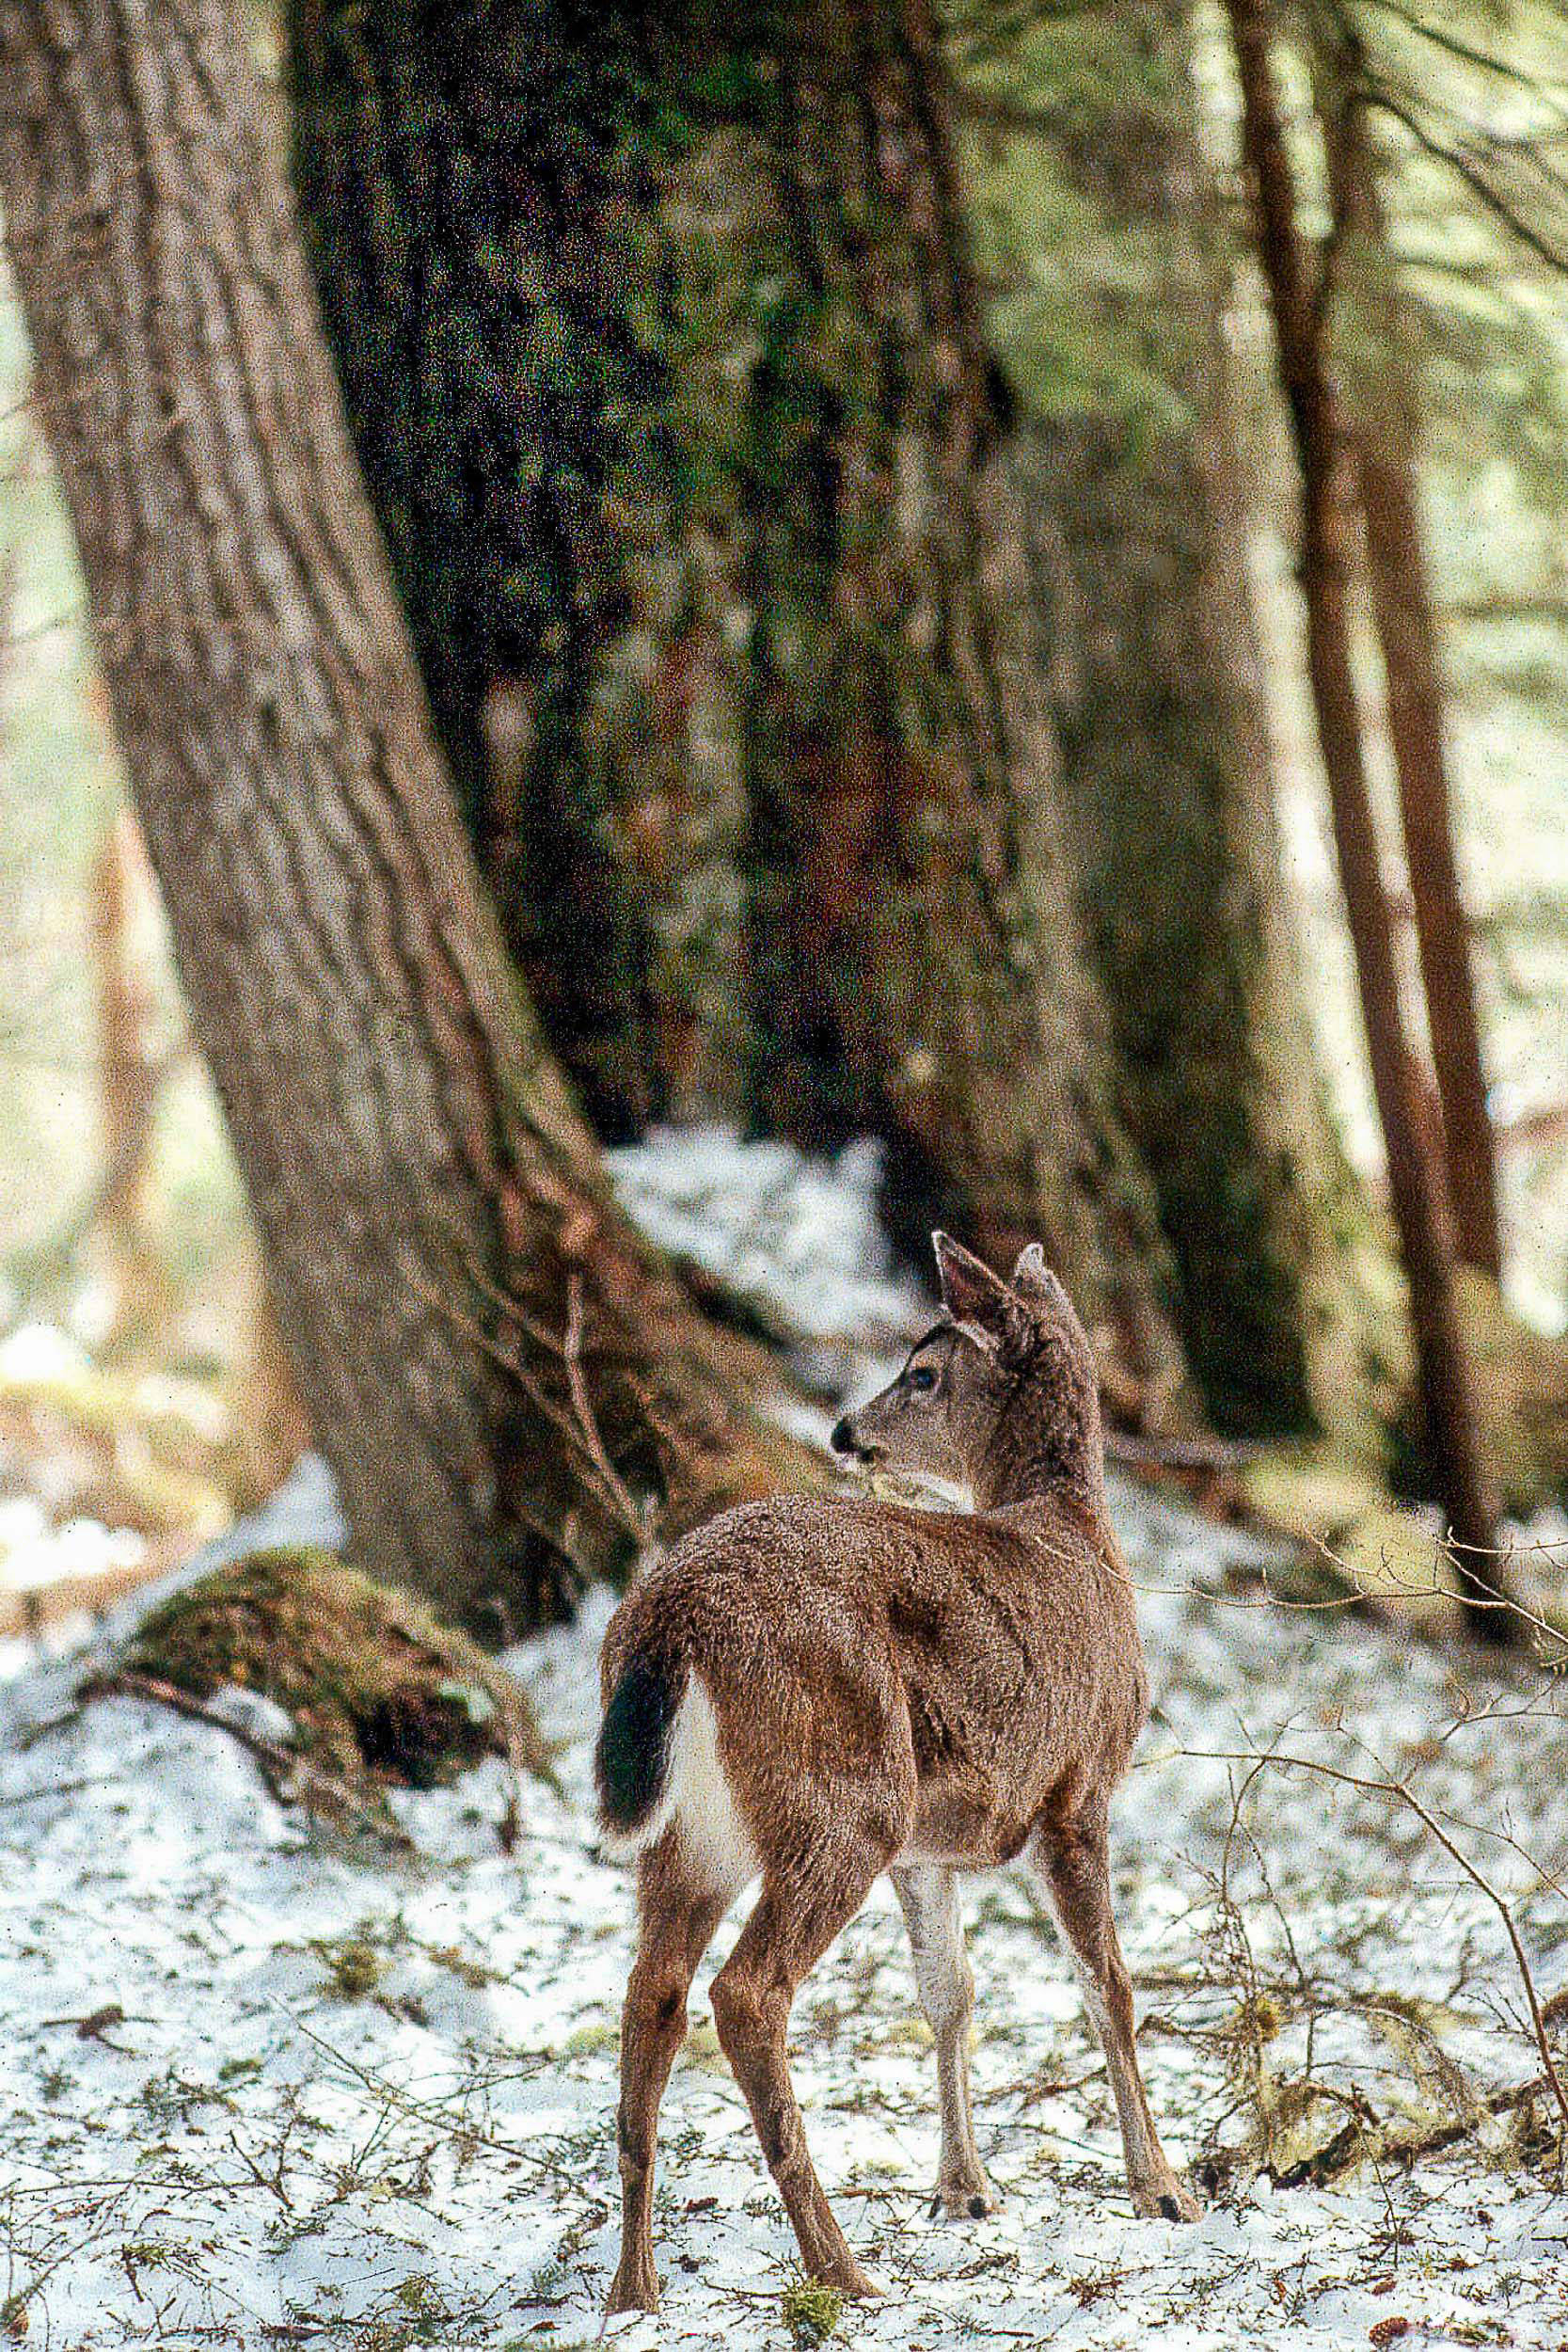 A Sitka black-tailed doe in a mid-to high-volume (large-tree) old growth stand on Douglas Island during a deep-snow winter. The tall forest canopy and big limb structure of the large trees intercept a significant amount of snow. Deer can travel easily through these stands and food is comparatively much more available than in the deep-snow conditions that occur in clear-cuts and muskegs as well as in small-tree old-growth stands. (Photo by John Schoen)